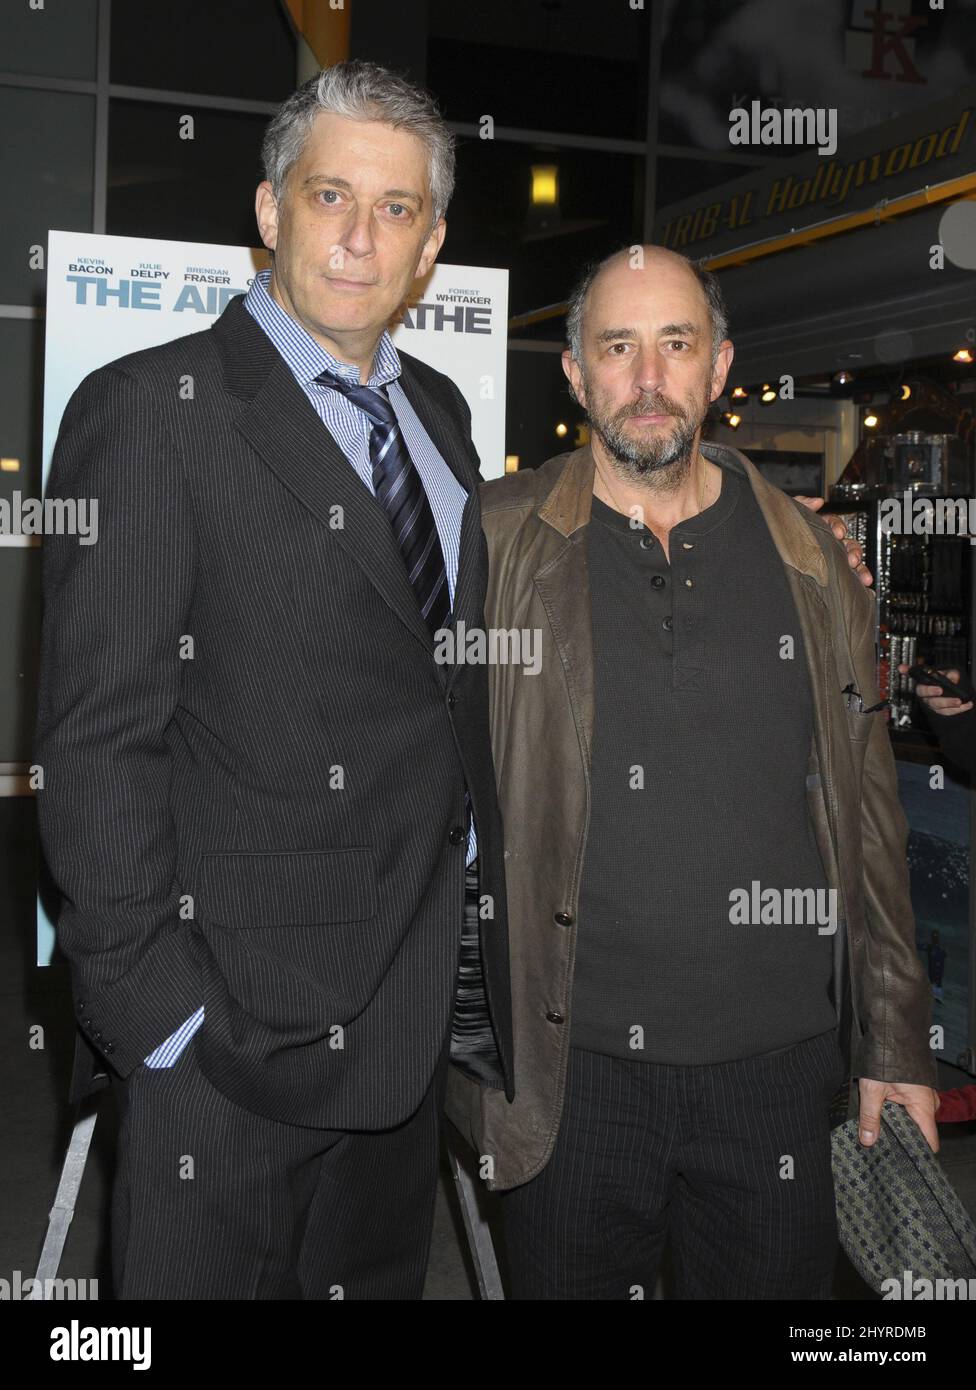 Paul Schiff and Richard Schiff attend the premiere of 'The Air I Breathe' held at the ArcLight Cinemas in Los Angeles. Stock Photo